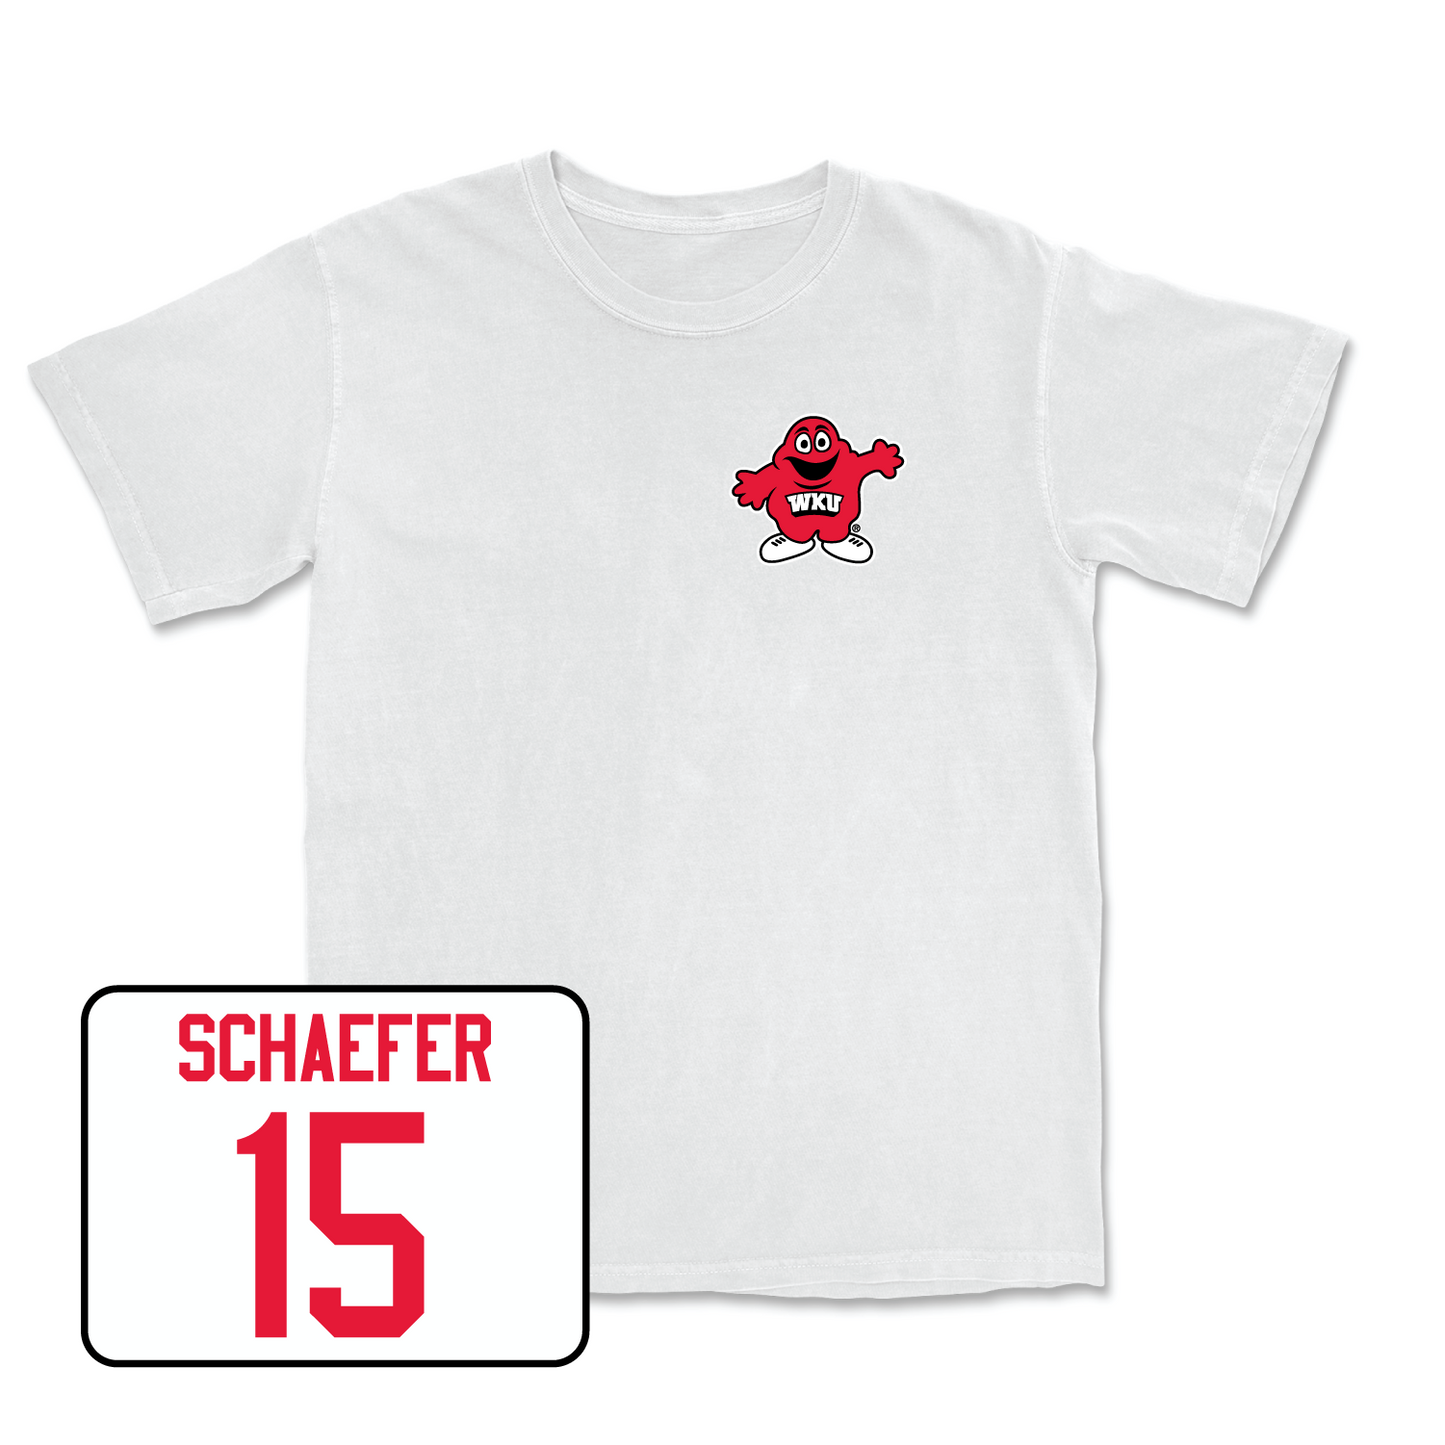 White Women's Volleyball Big Red Comfort Colors Tee X-Large / Abigail Schaefer | #15